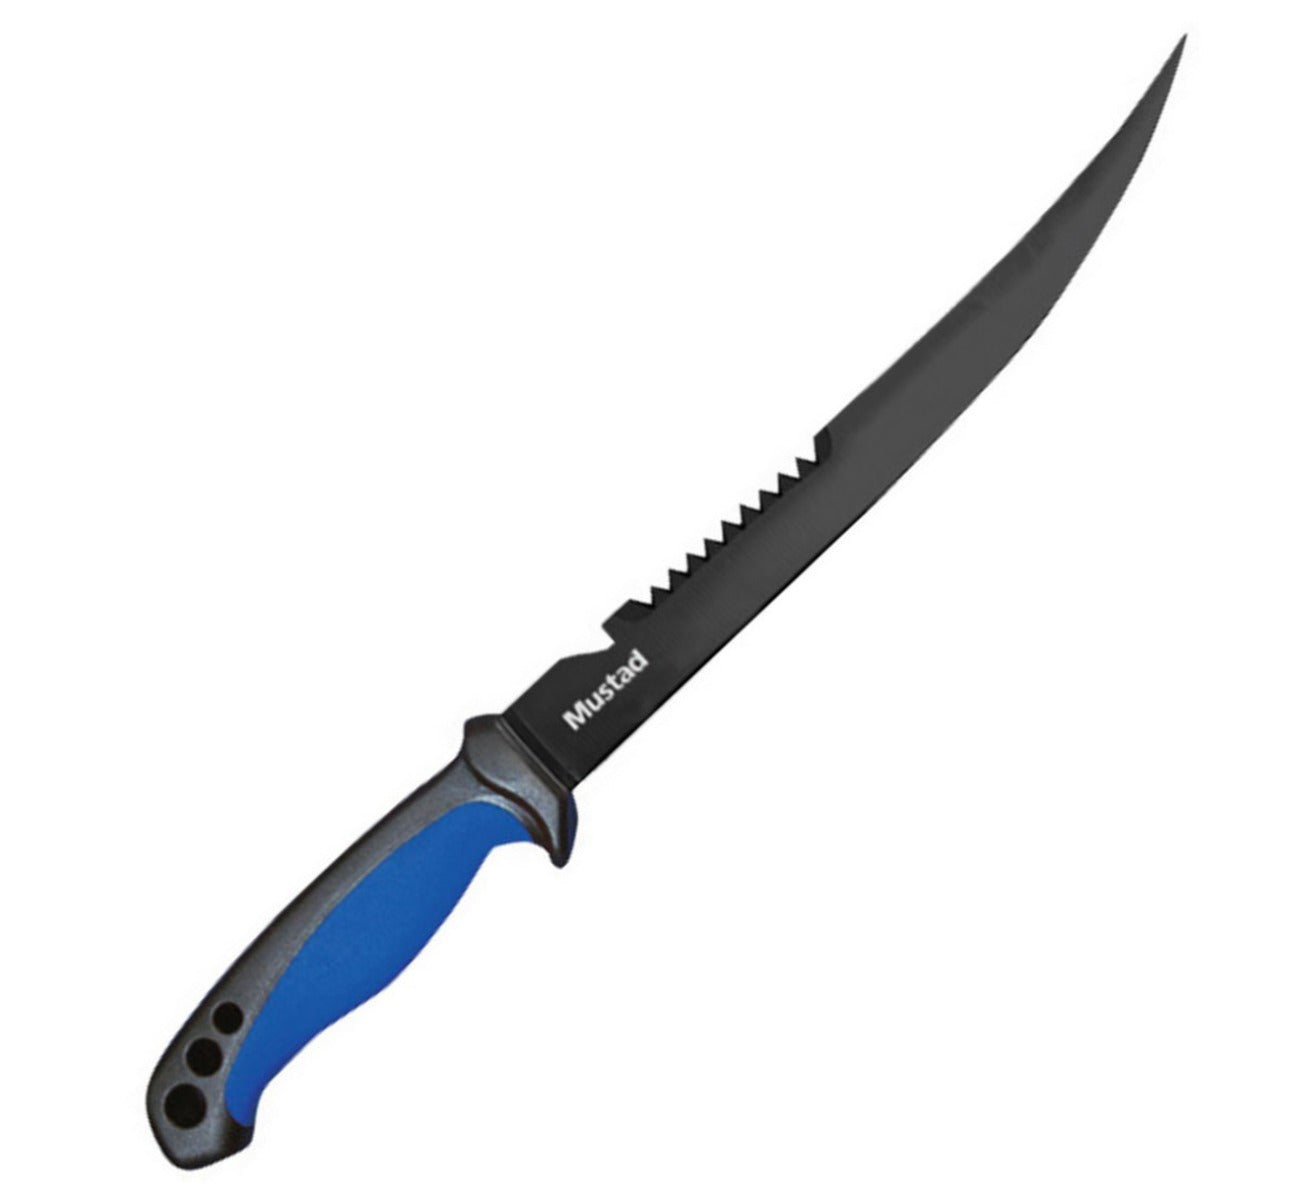 Mustad 6 inch Stainless Steel Filleting Knife with Sheath